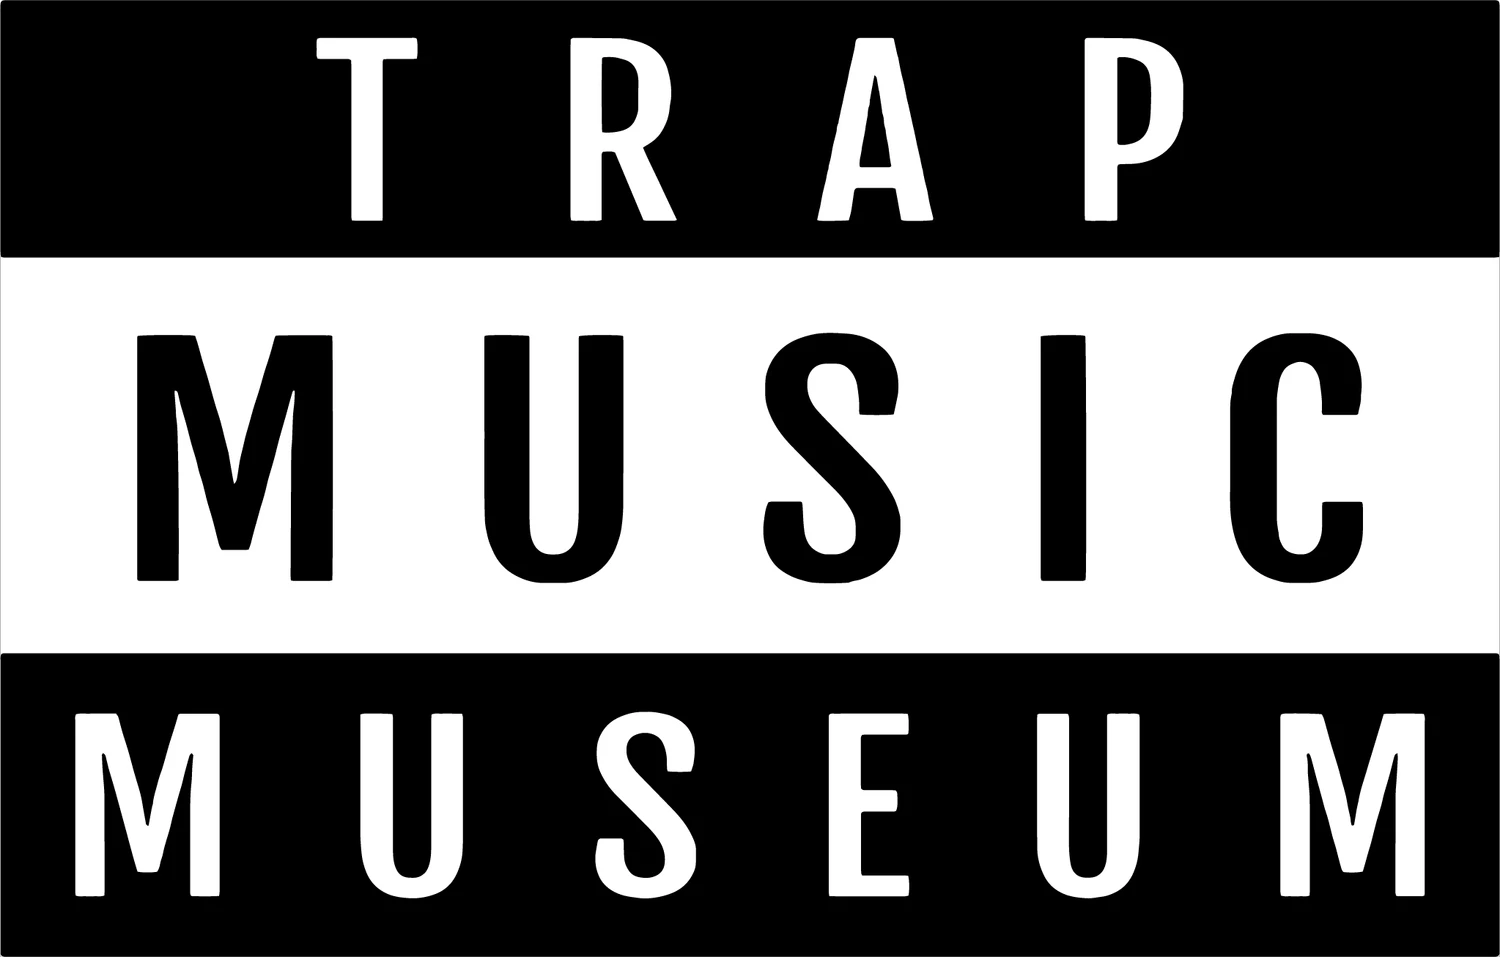  Trap Music Museum promotions